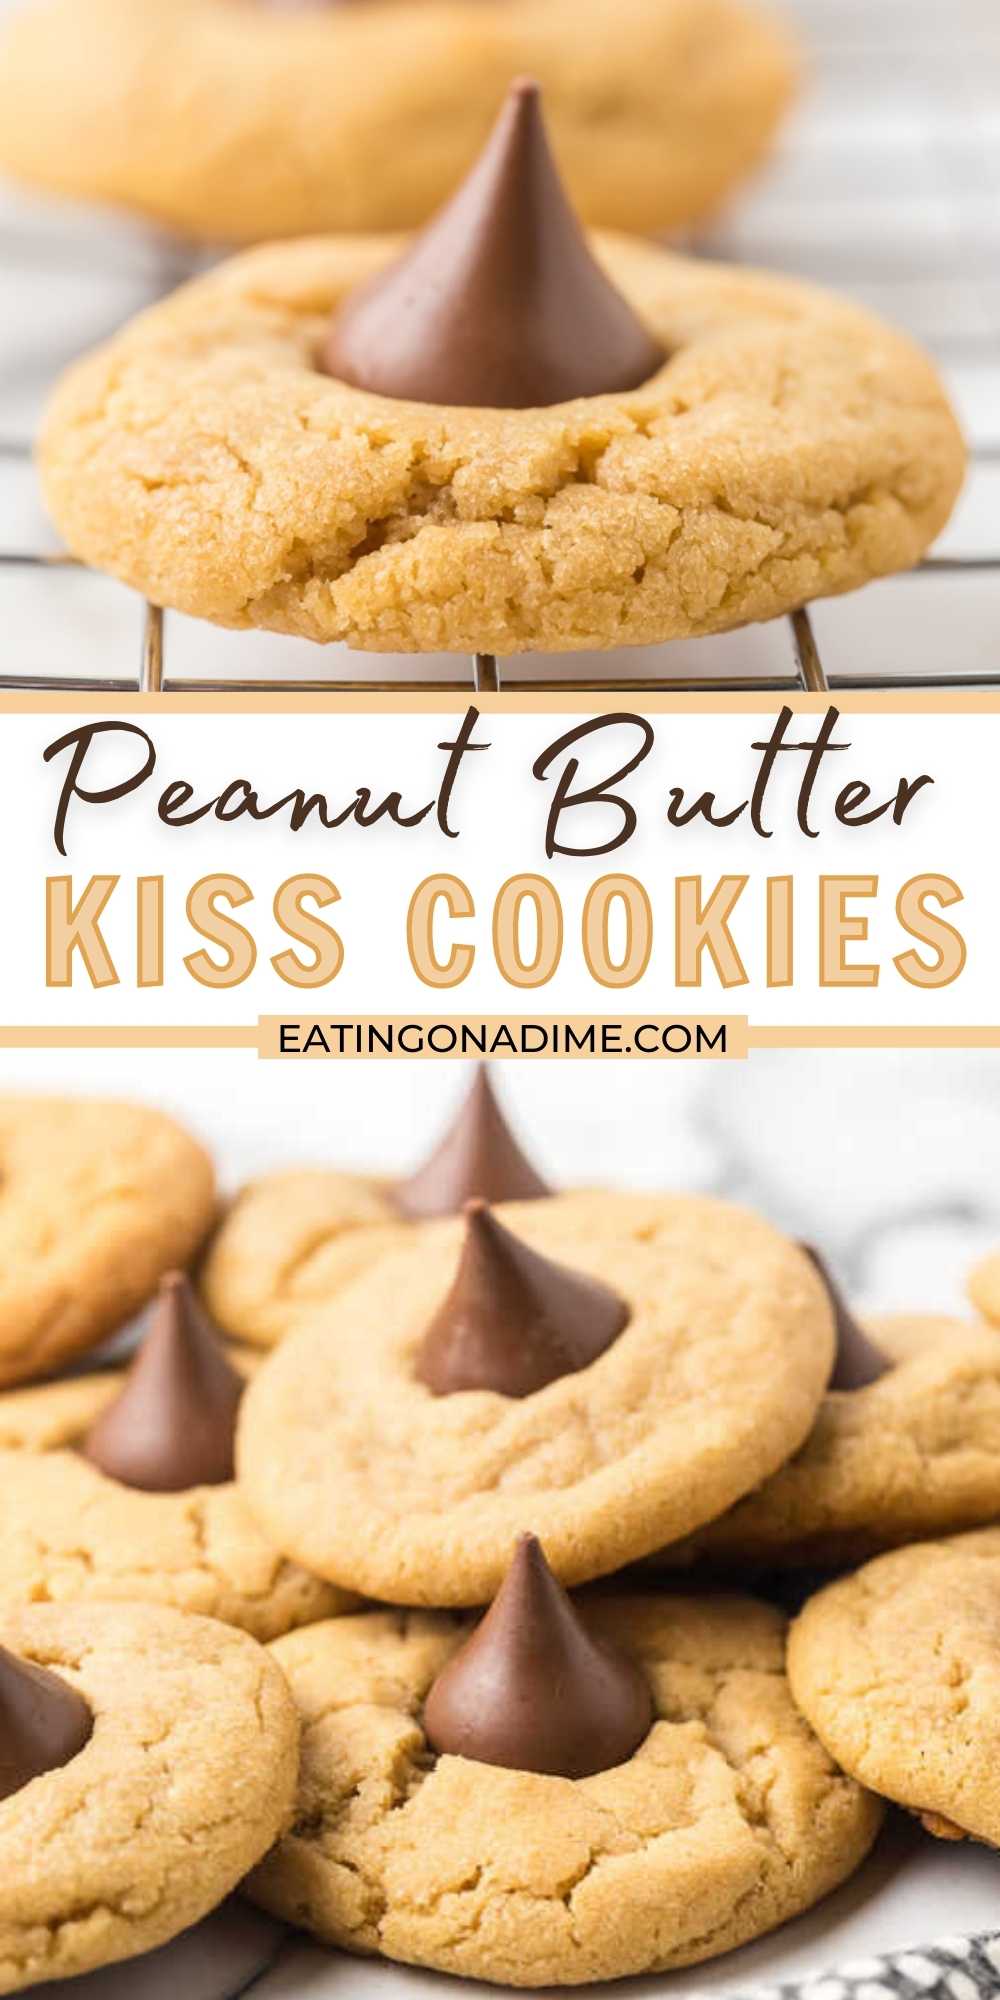 These Peanut Butter Kiss Cookies are fun to make and taste delicious.  You'll be surprised by how easy these are and everyone will love them! This Peanut Butter Kiss Cookies recipe are the best Christmas cookie recipe! #eatingonadime #cookierecipes #holidayrecipes #dessertrecipes 
